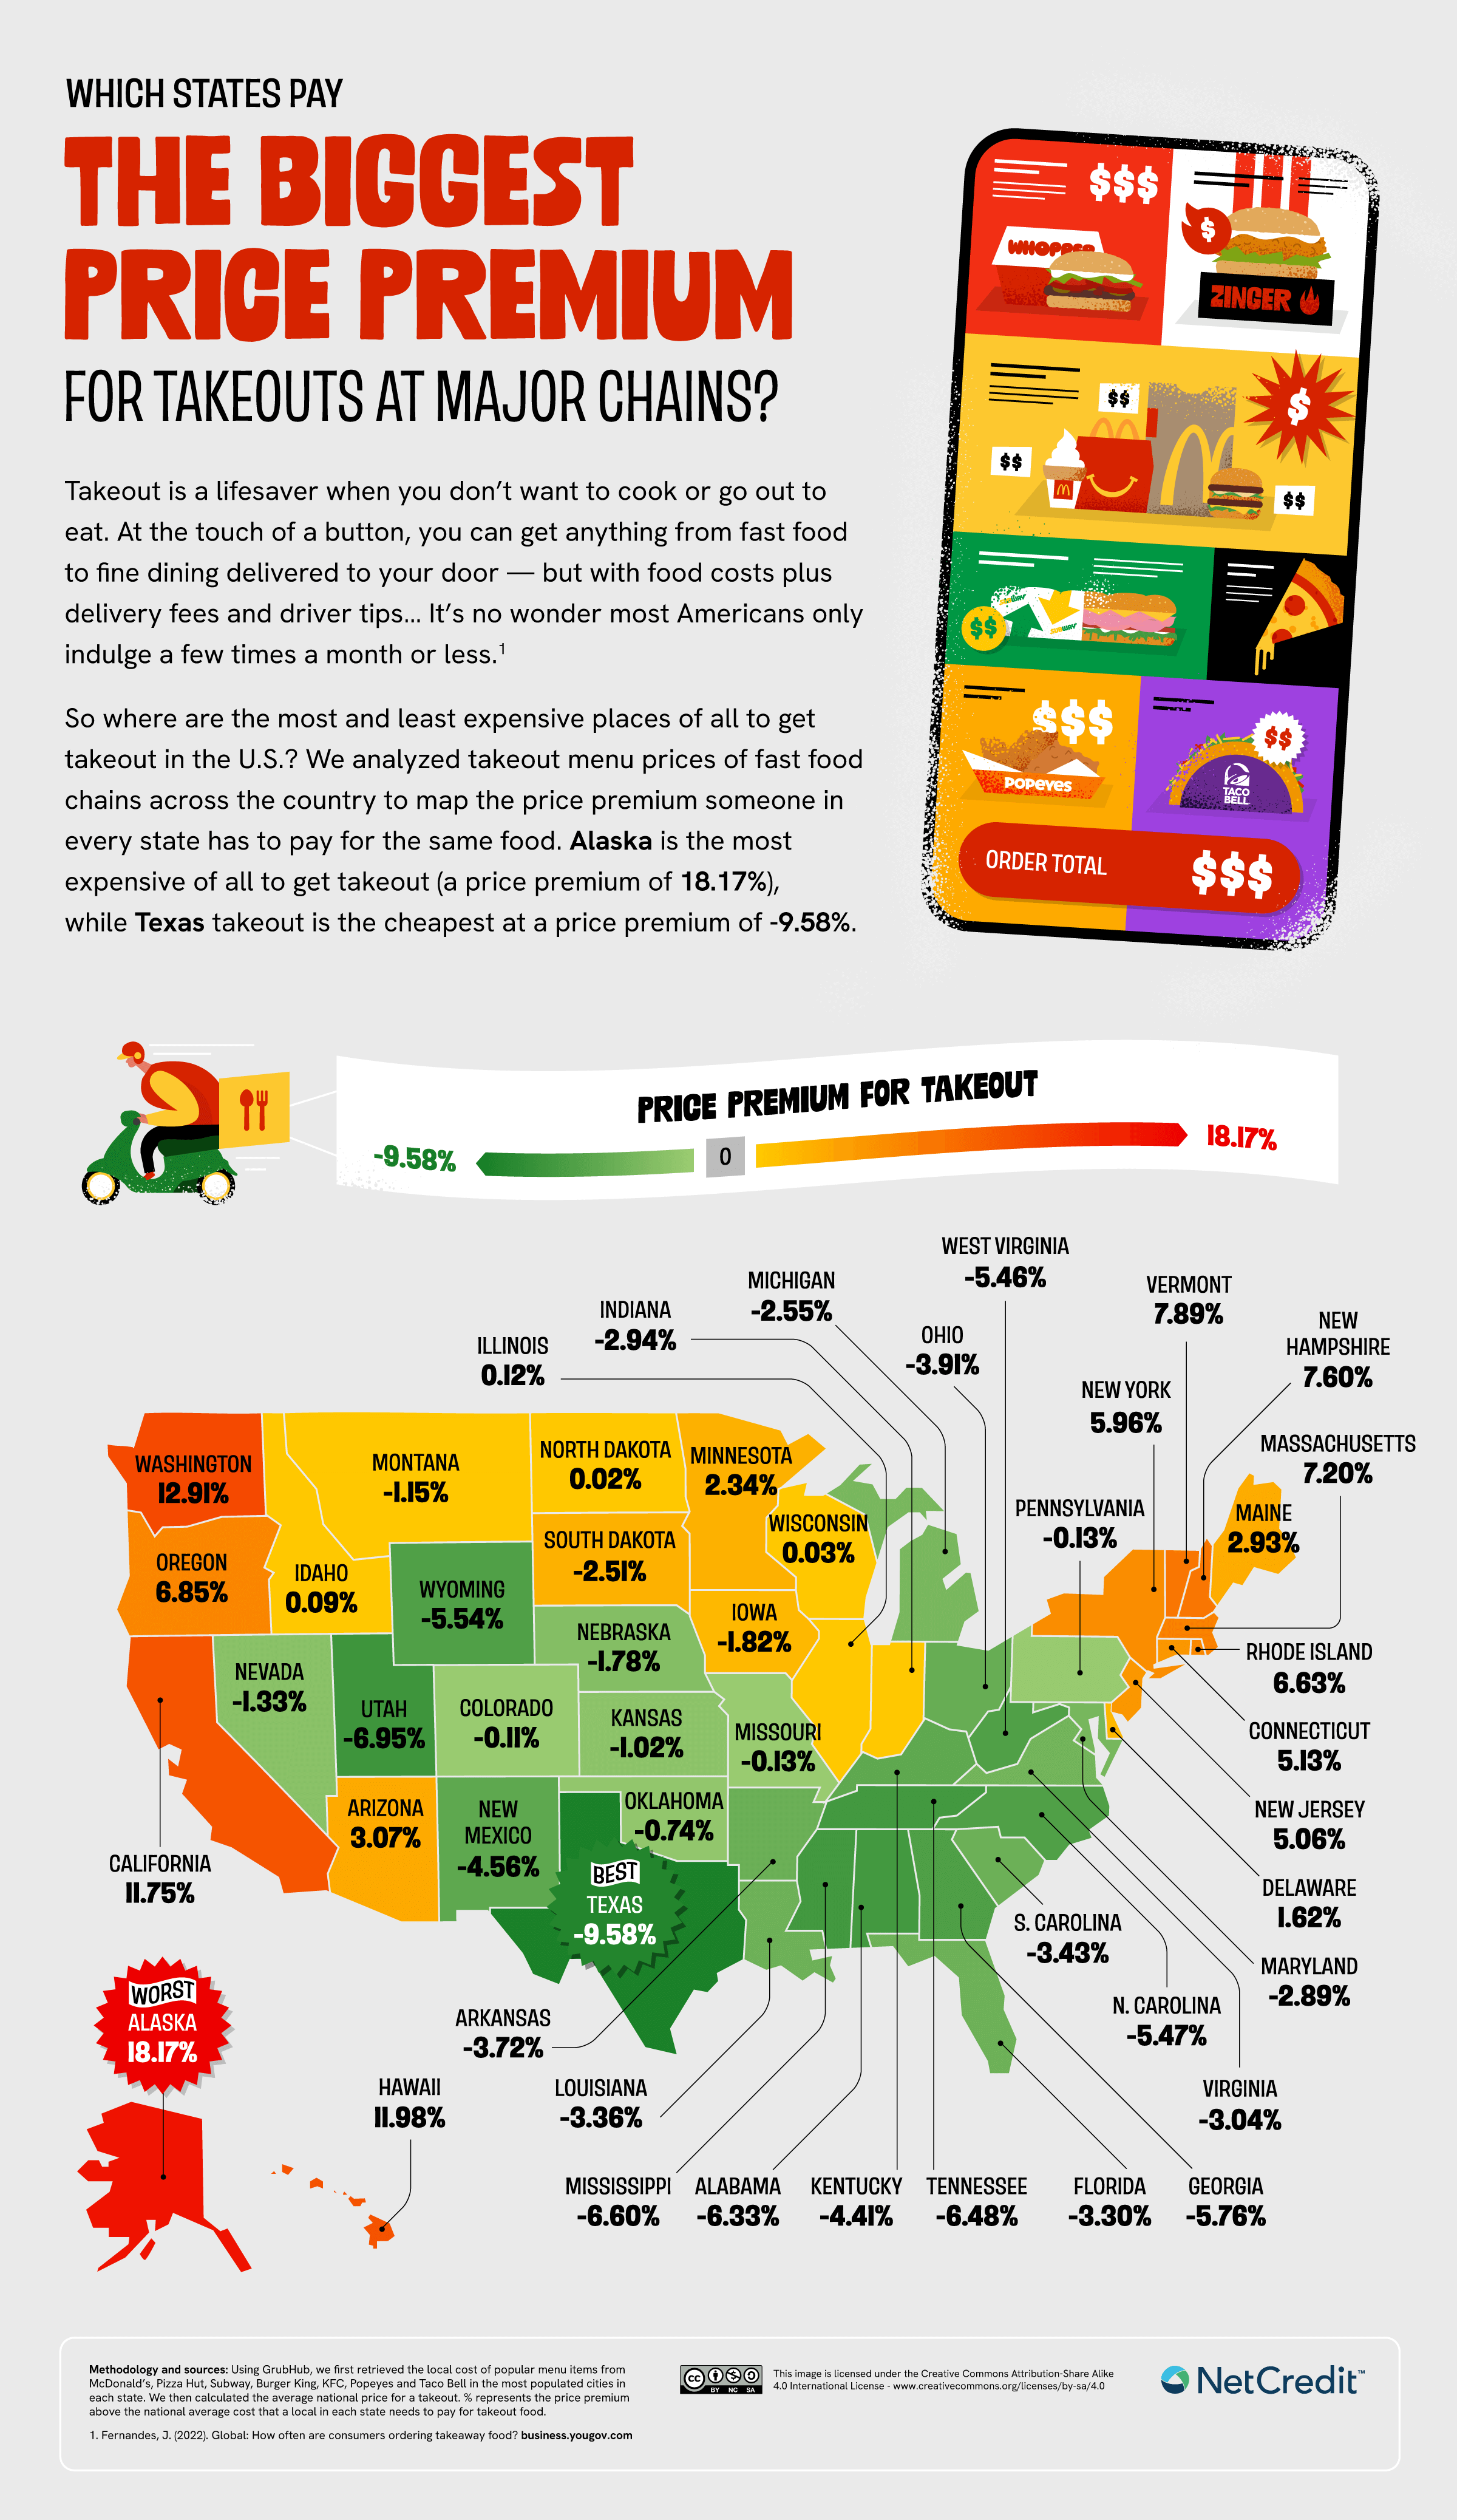 Infographic of states that pay the biggest price premium for takeout.